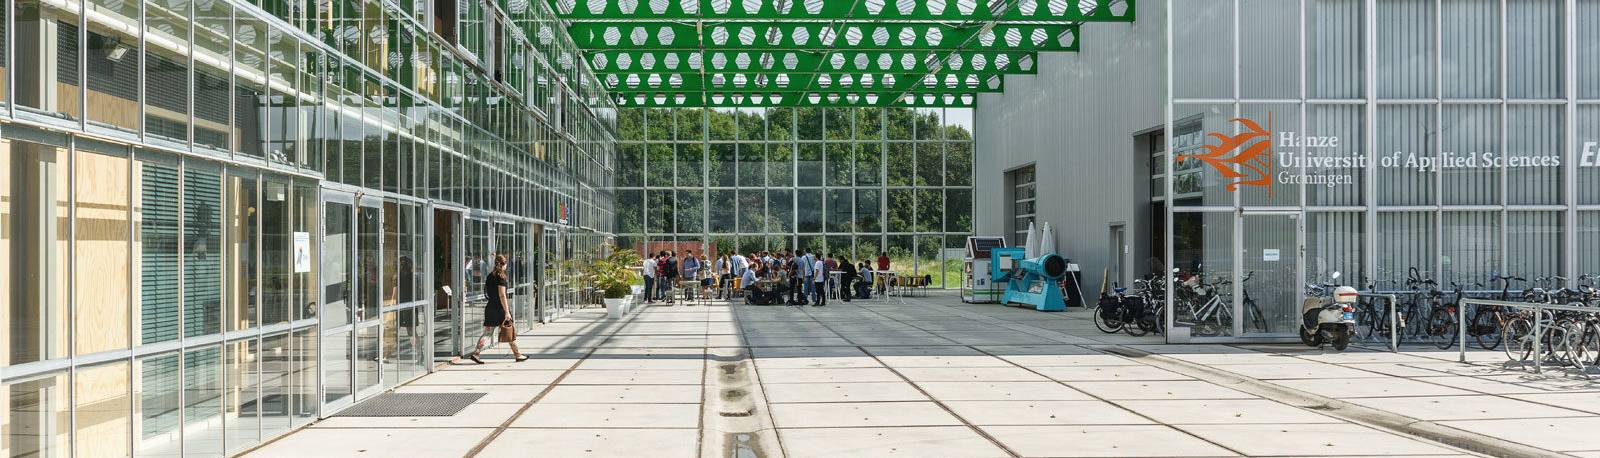 People sitting in a covered outdoor area at the EnTranCe Energy Fieldlab